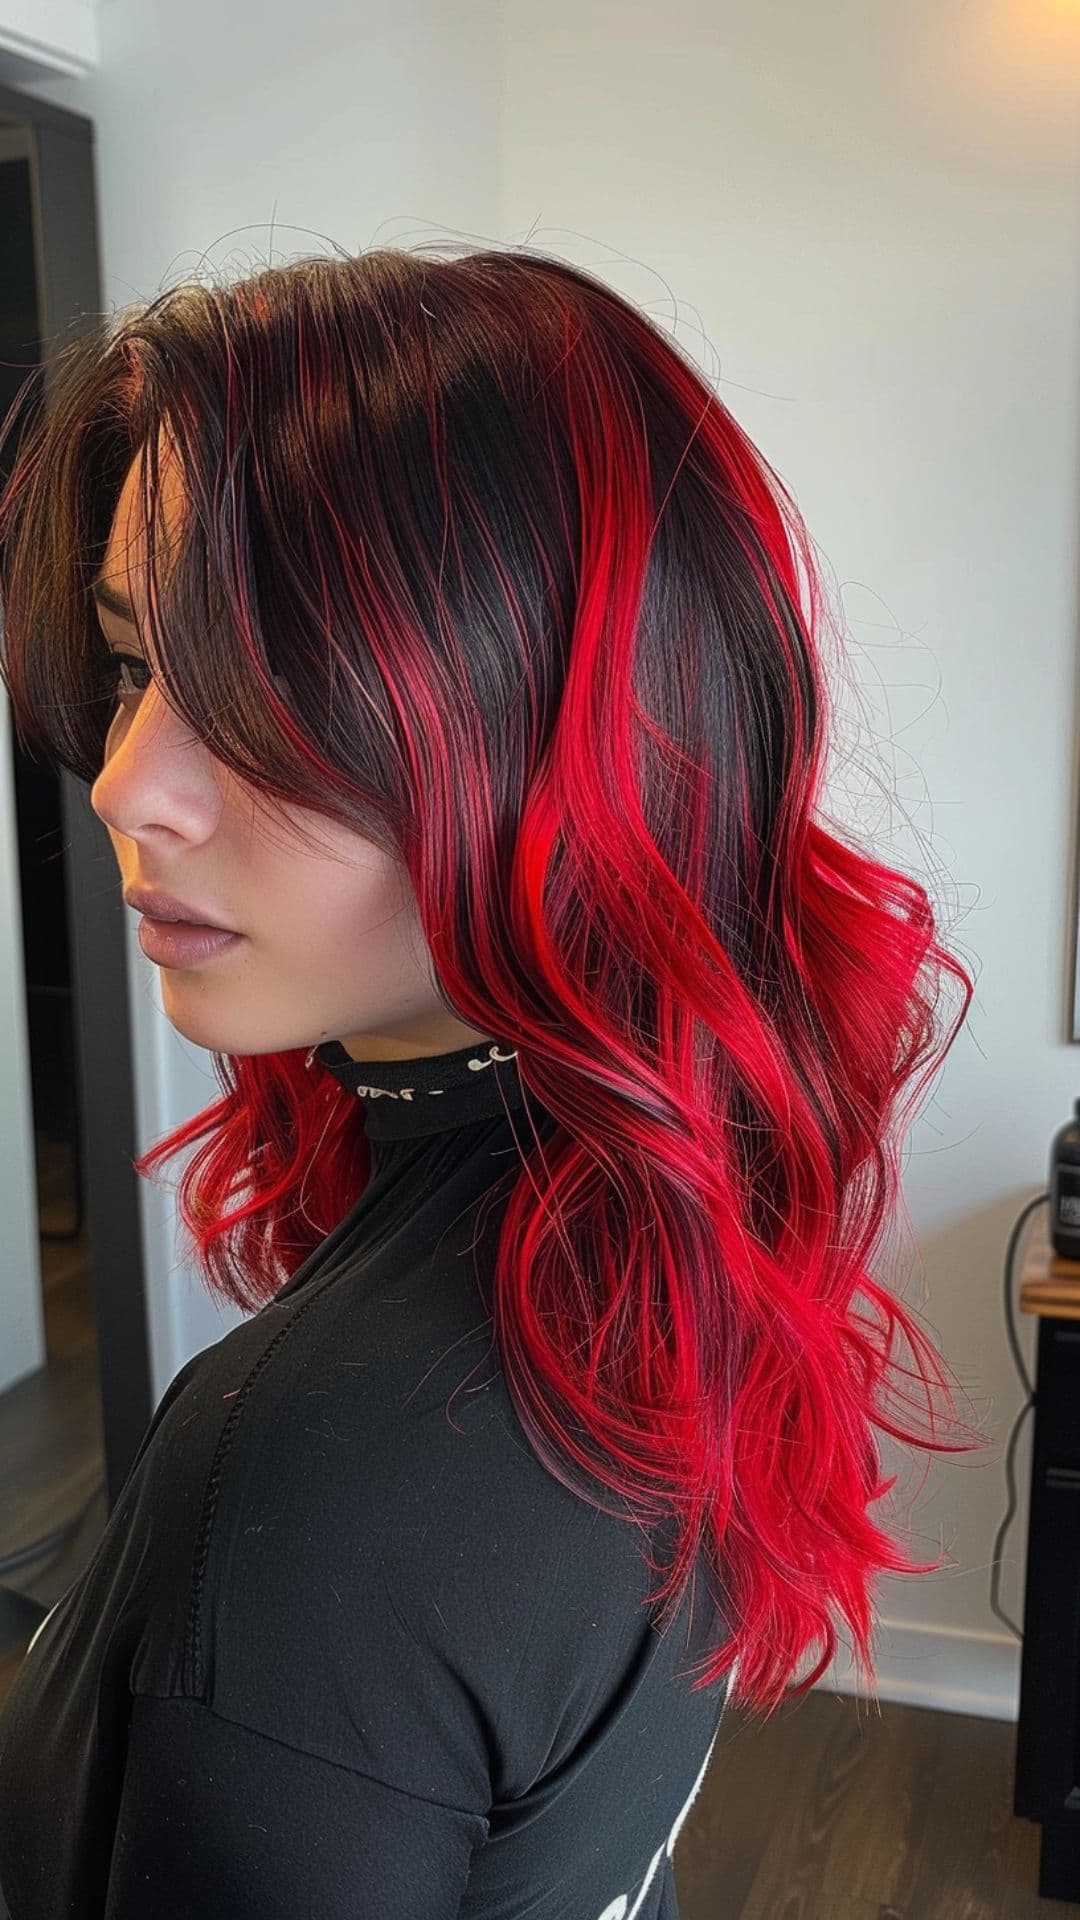 A woman modelling a black and red hair.